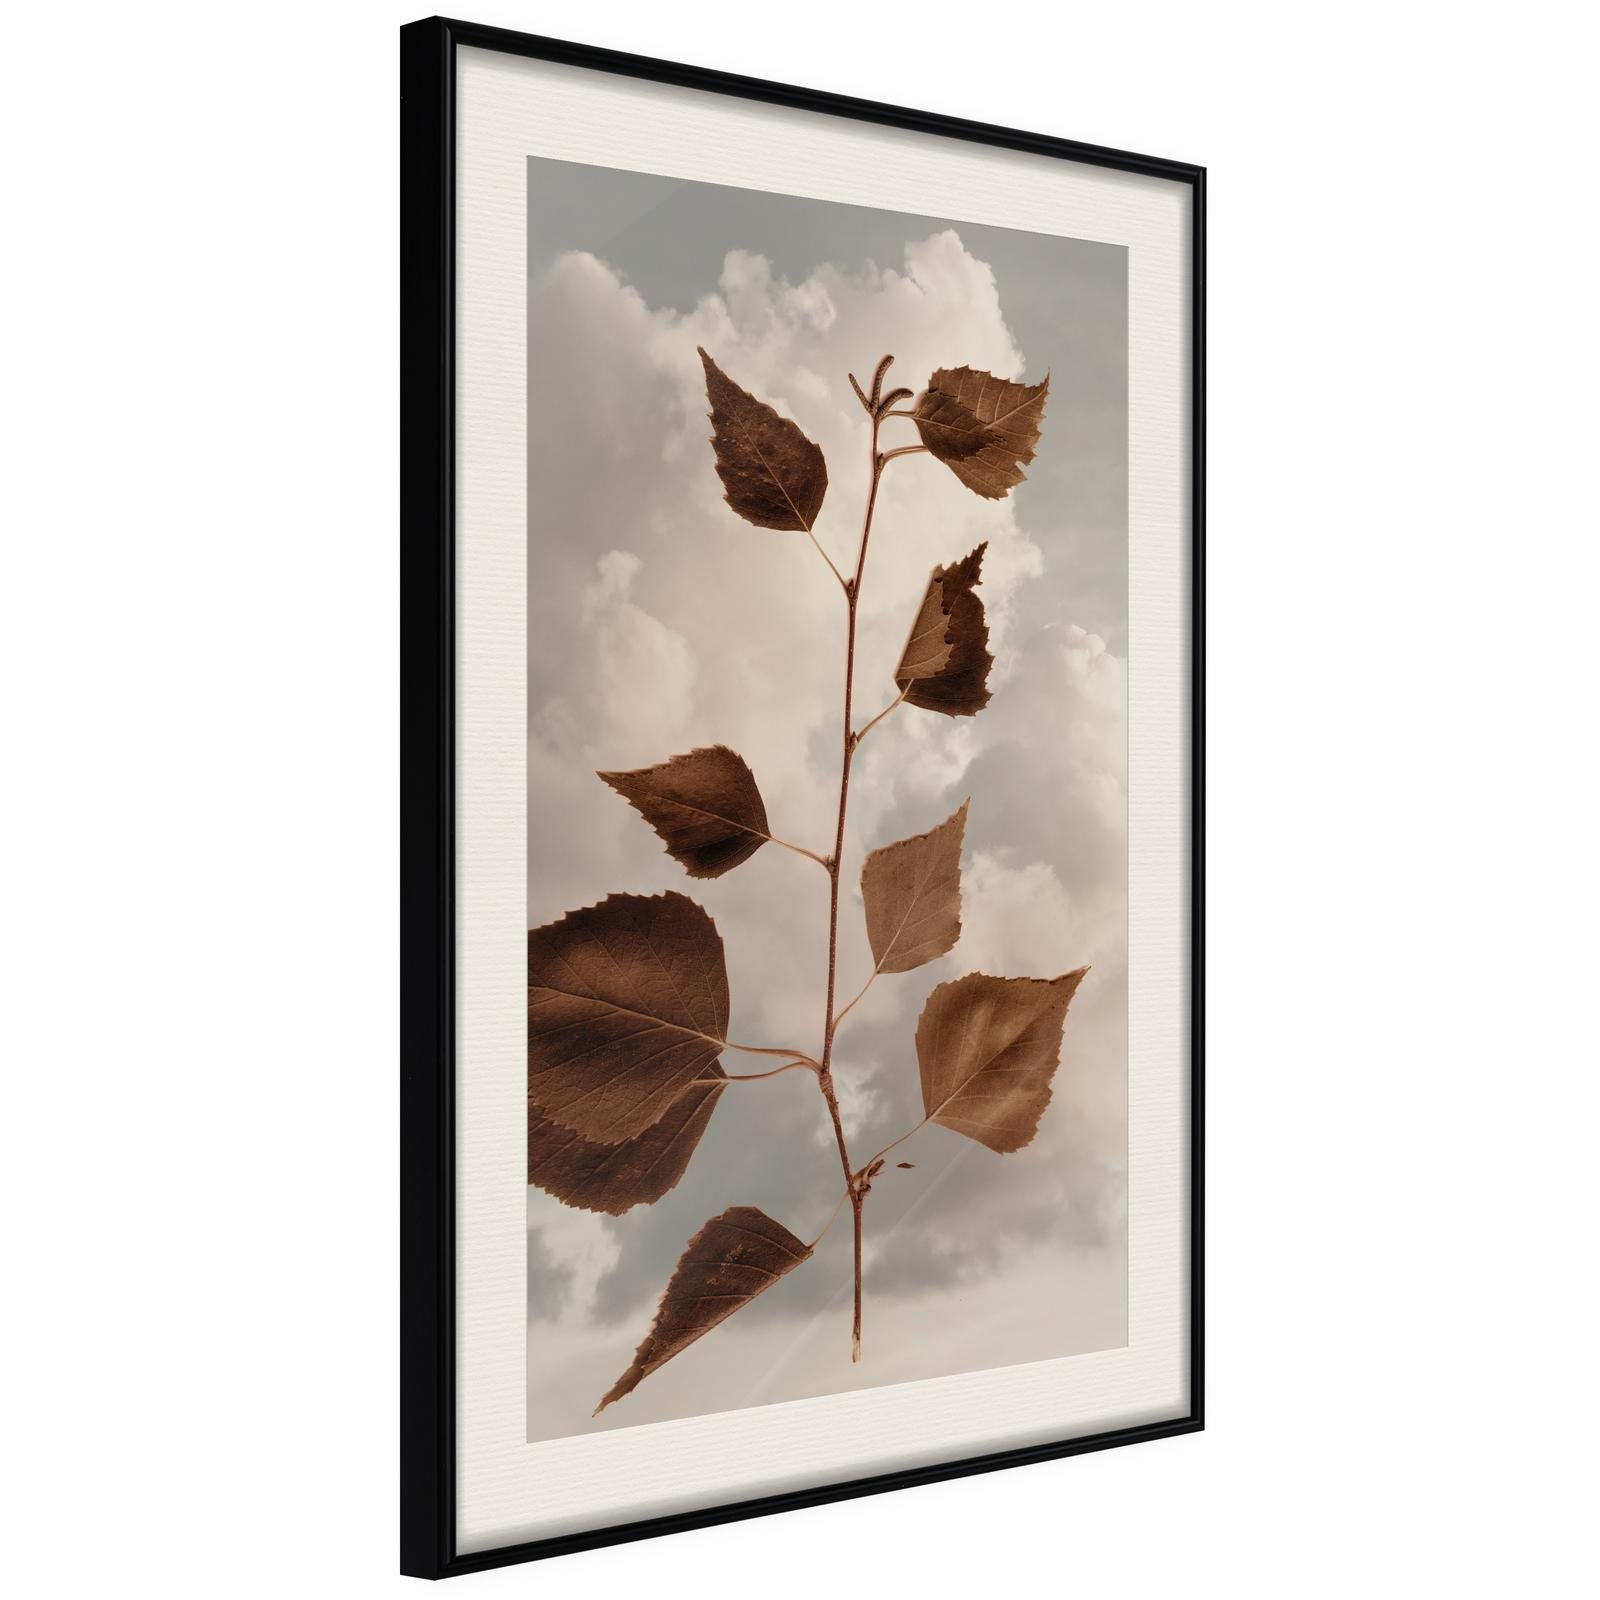 Inramad Poster / Tavla - Leaves in the Clouds-Poster Inramad-Artgeist-20x30-Svart ram med passepartout-peaceofhome.se